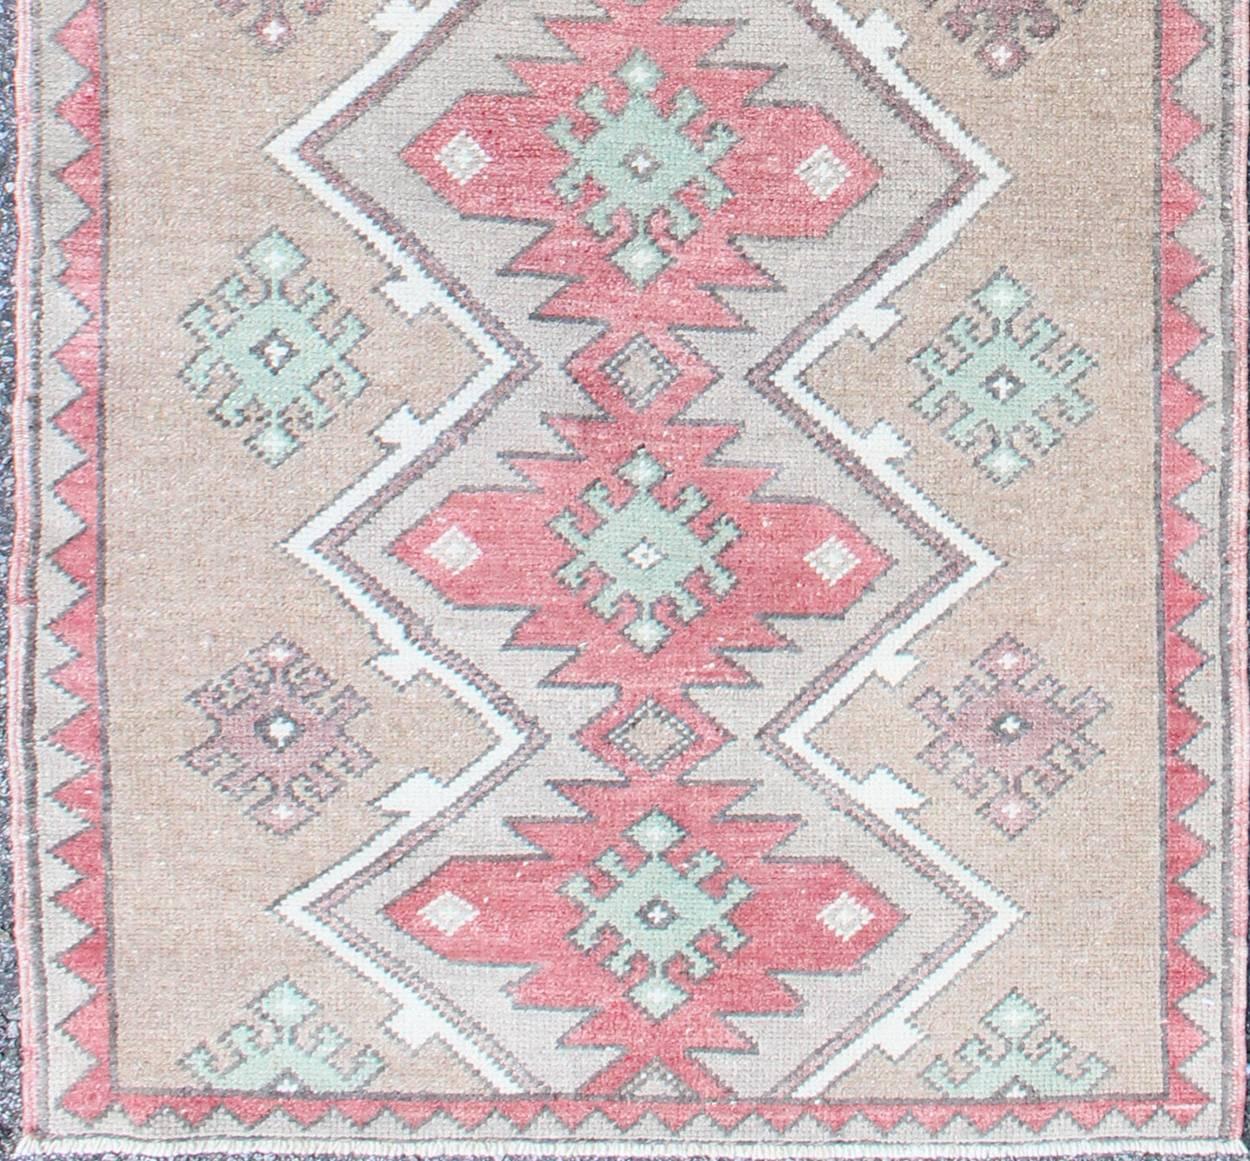 Turkish Tulu Runner With Geometric Medallions in Vivid Coral, Tan, and Mint Green. Rug EN-142686. Keivan Woven Arts country of origin / type: Turkey / Tulu circa mid-20th century.

This Tulu runner contains seven red and light green medallions laid